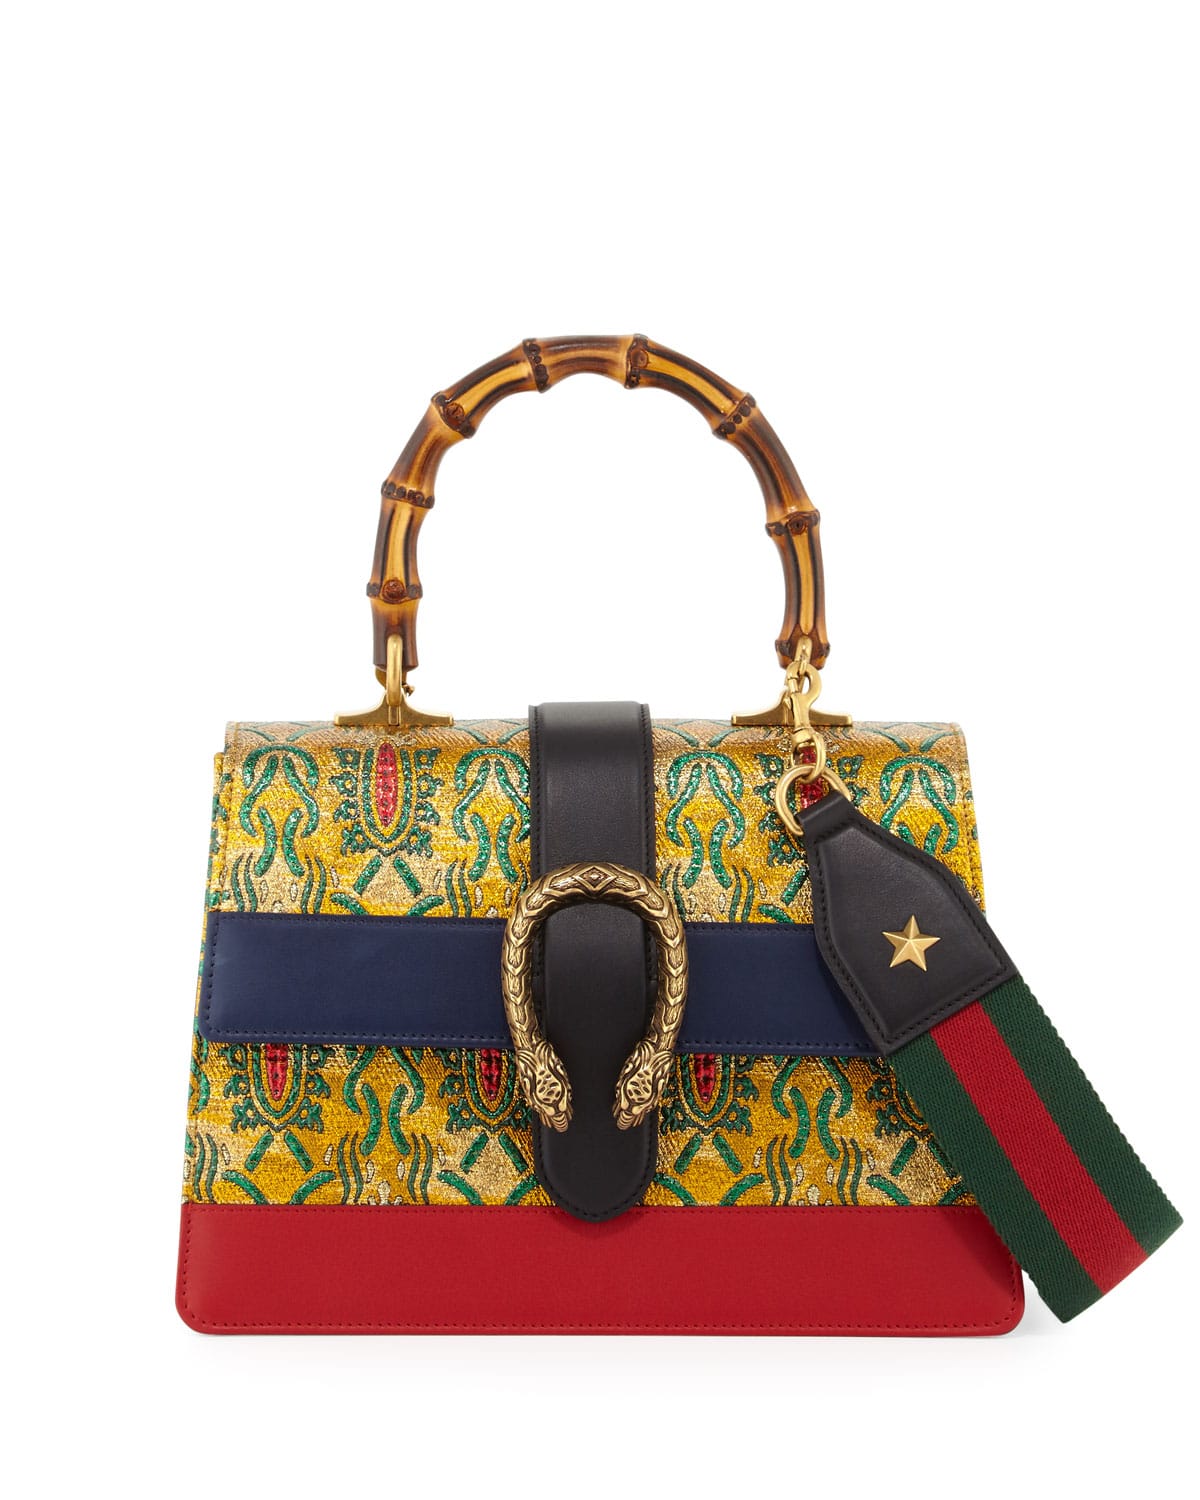 Gucci Spring/Summer 2017 Bag Collection | Spotted Fashion